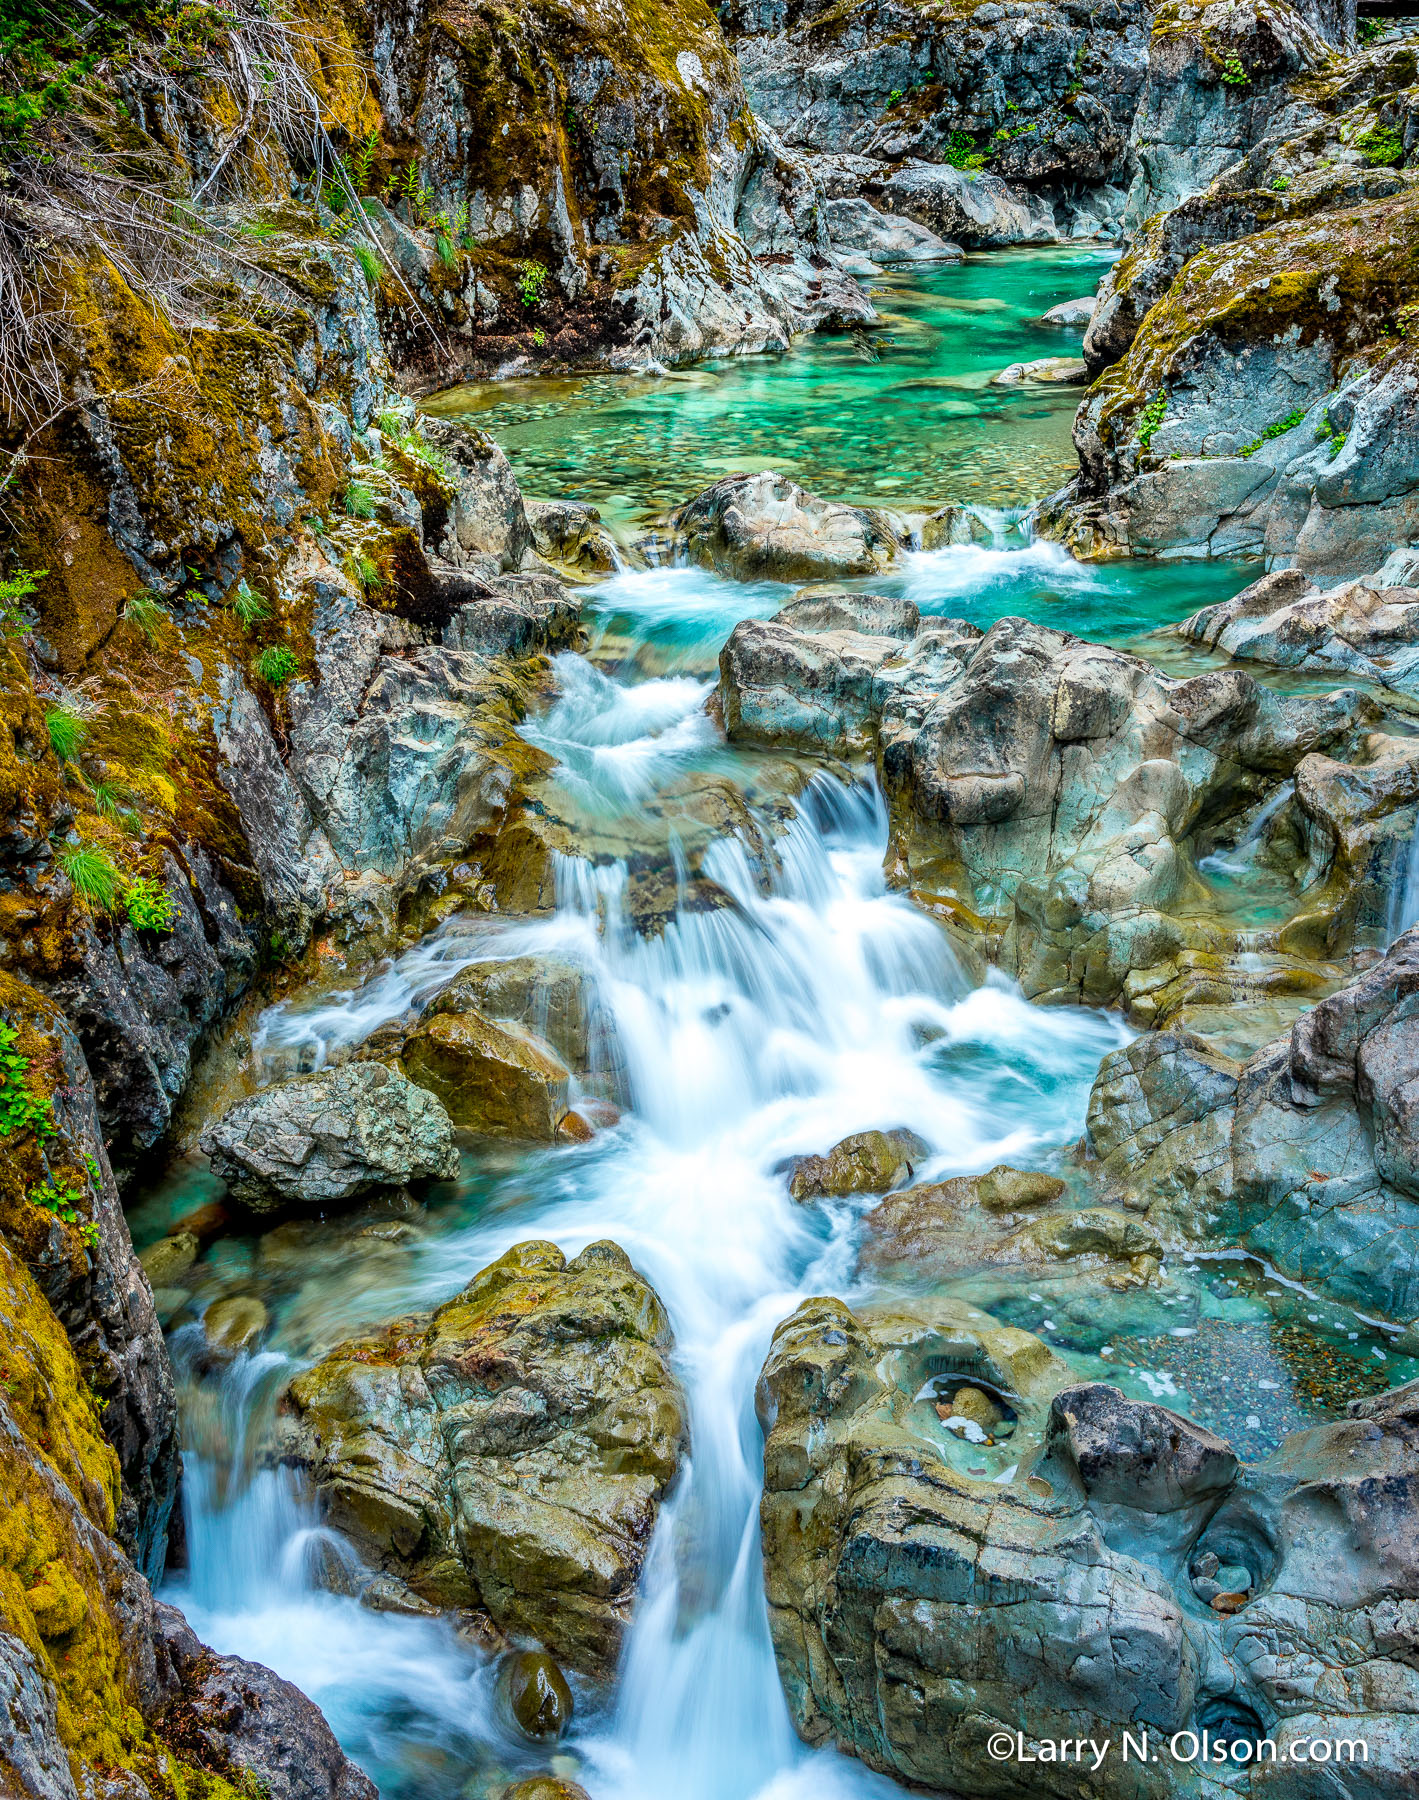 Ohanapecosh River, Mount Rainier National Park, WA | The crystline clear water of  Ohanapecosh River flows through an old growth forest,